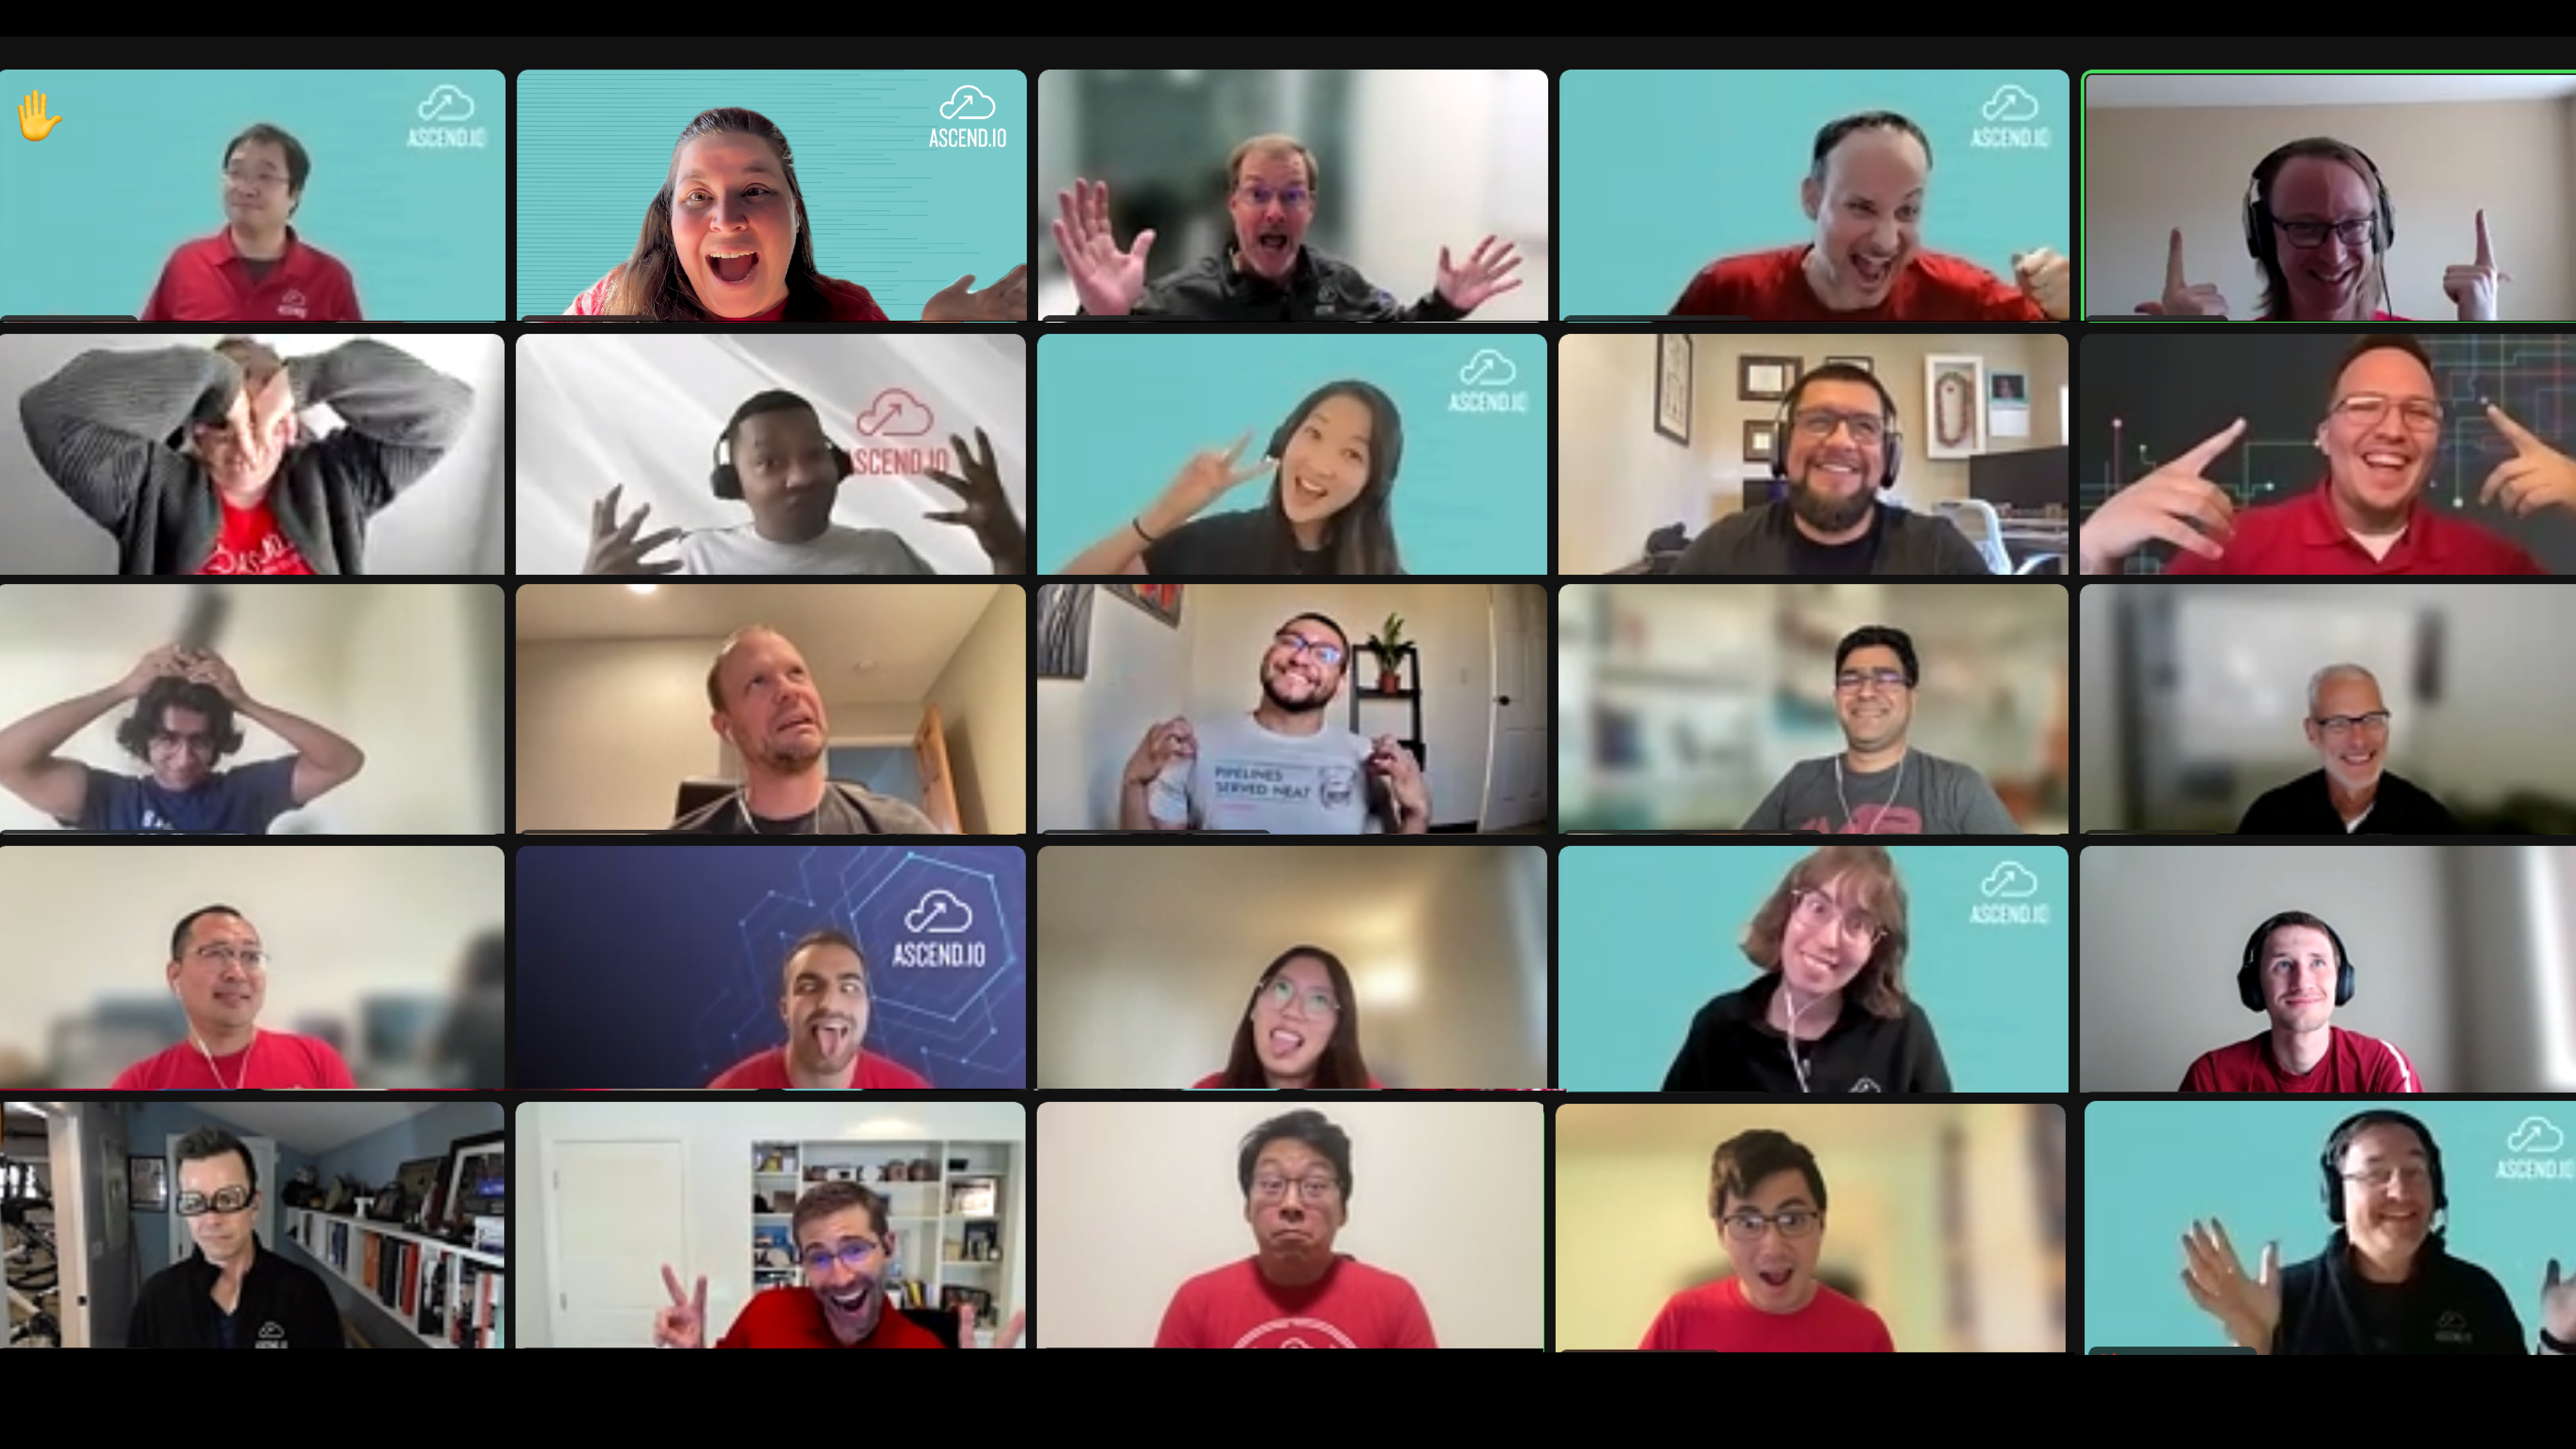 The Ascend team on a video call